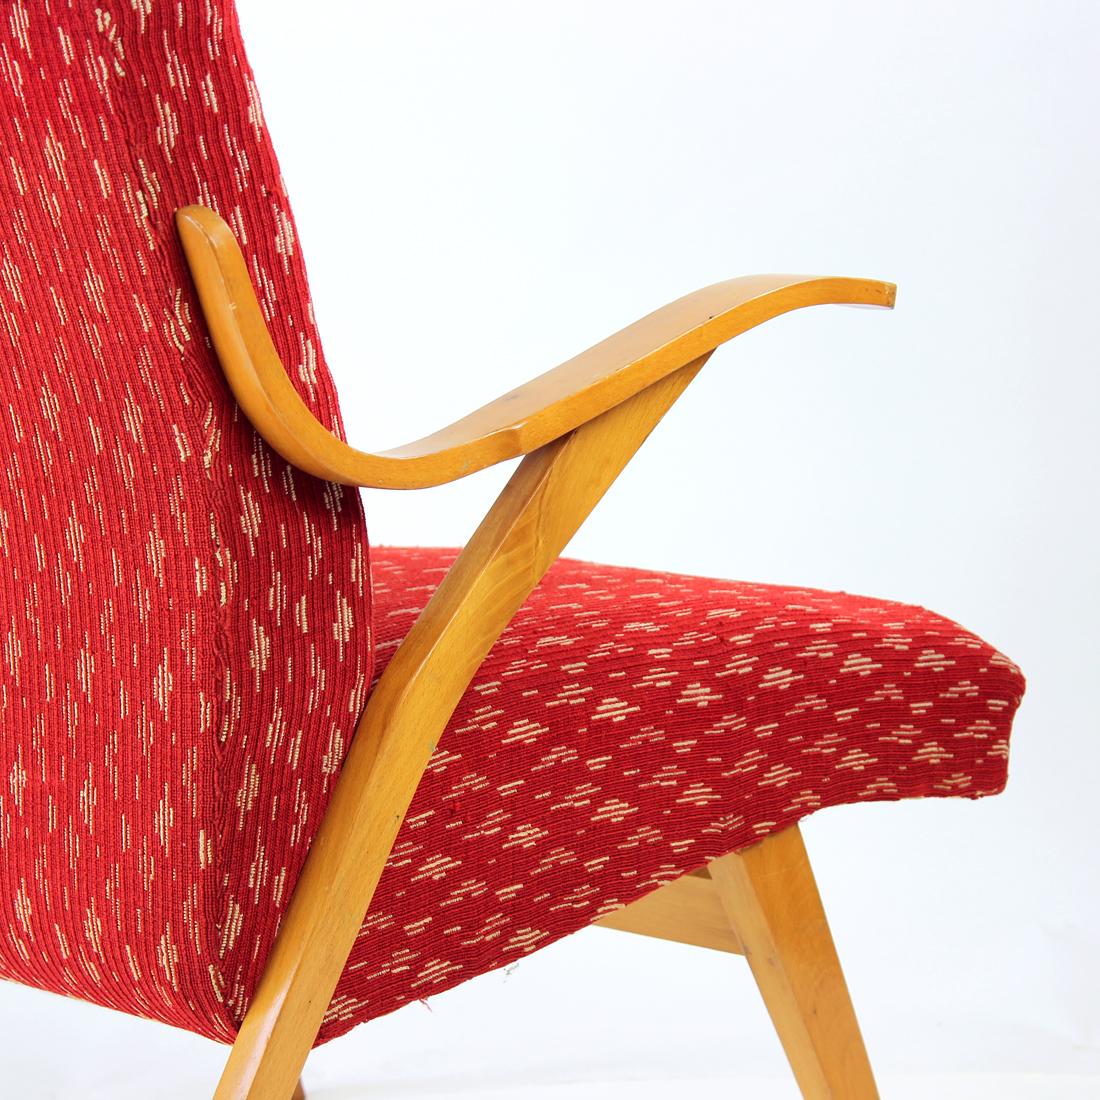 Midcentury Armchair in Original Red Fabric & Blonde Wood, Czechoslovakia, 1960s For Sale 1